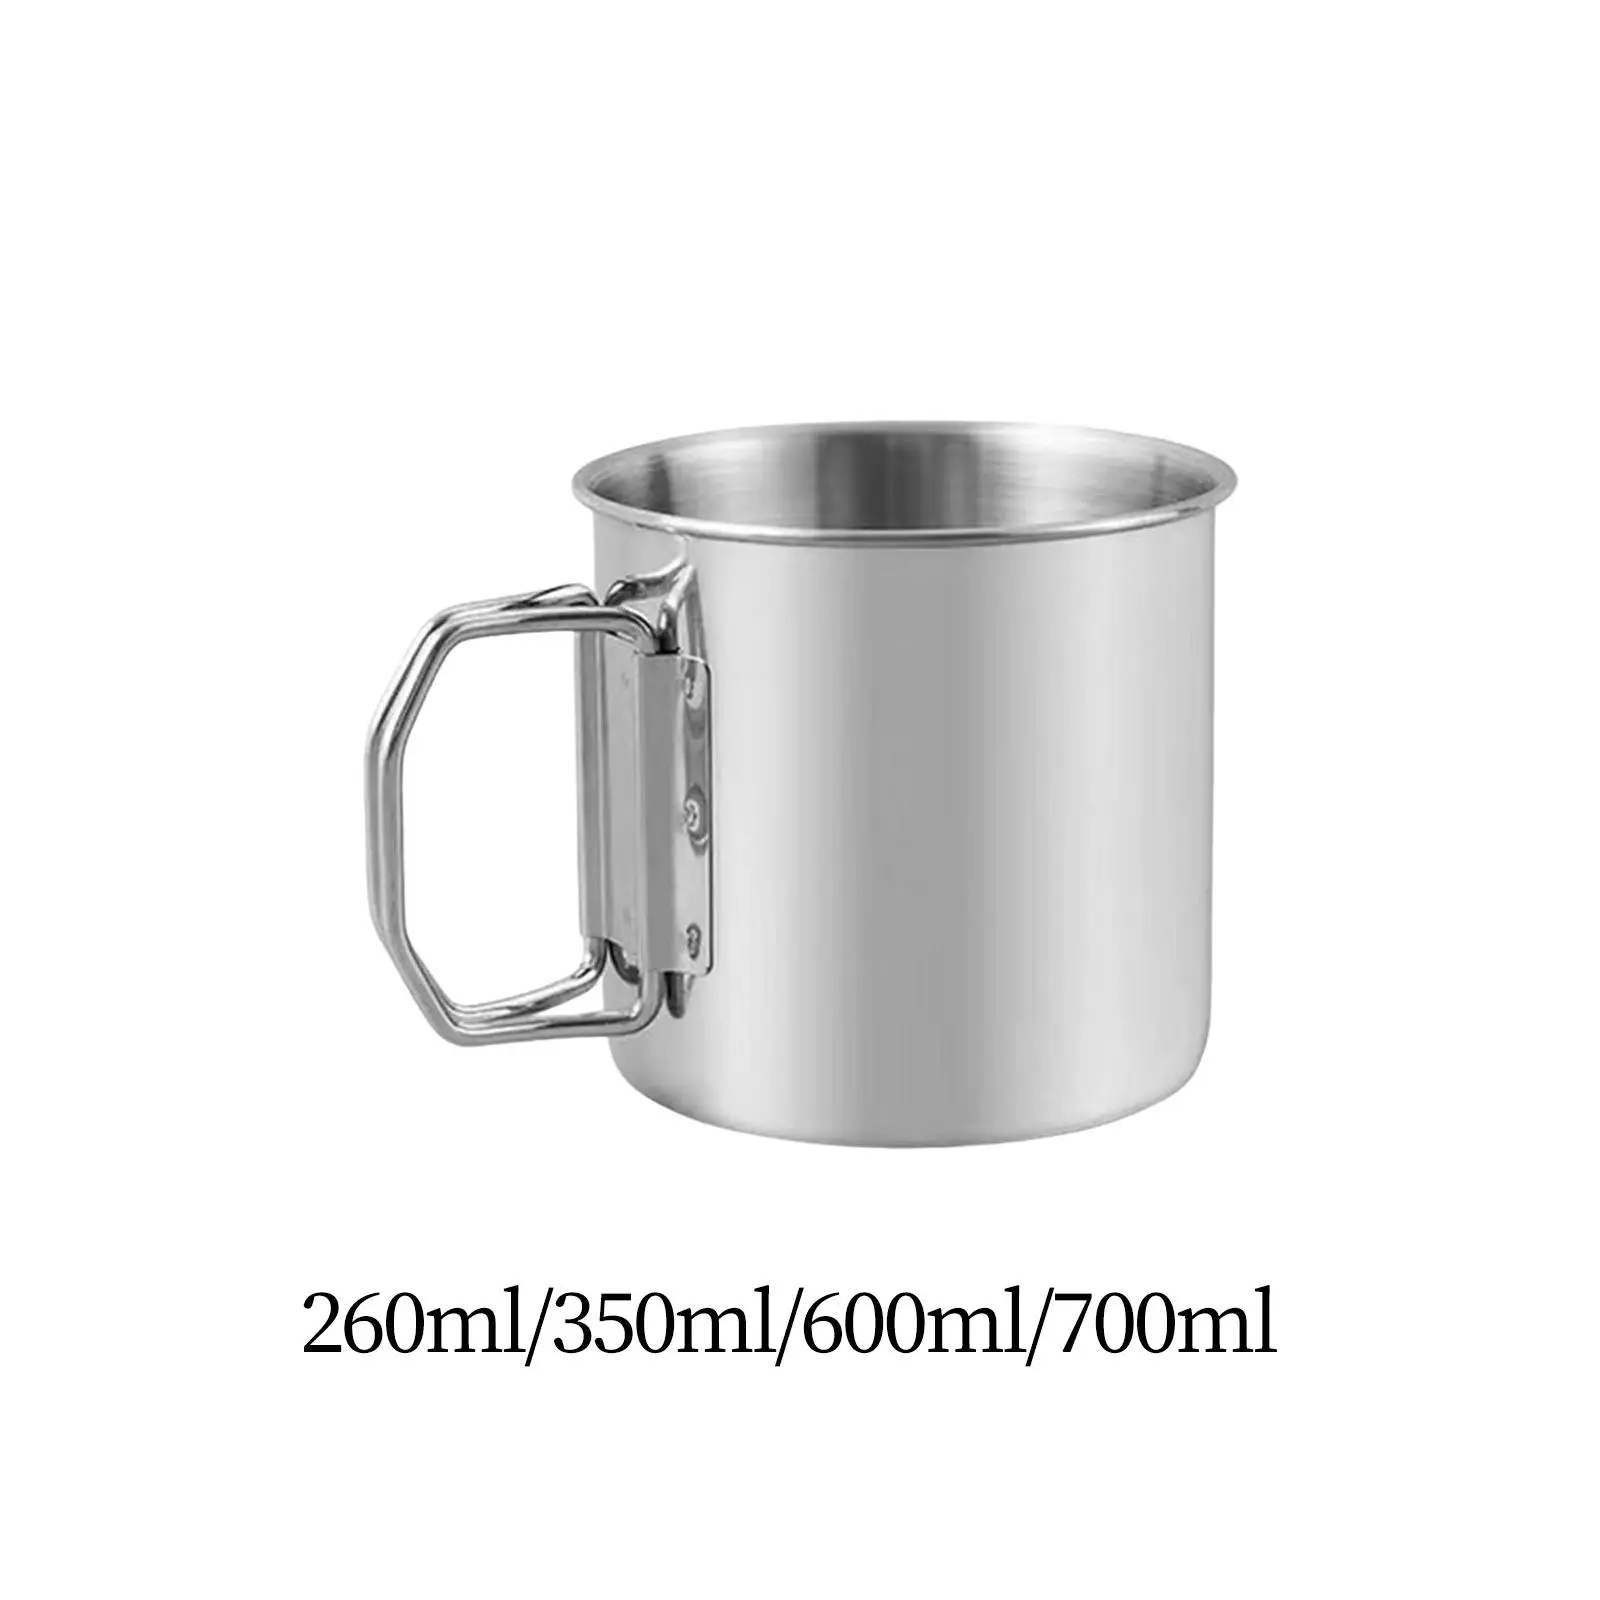 Camping Cup Mug Lightweight drinkware with folding handles for outdoor use